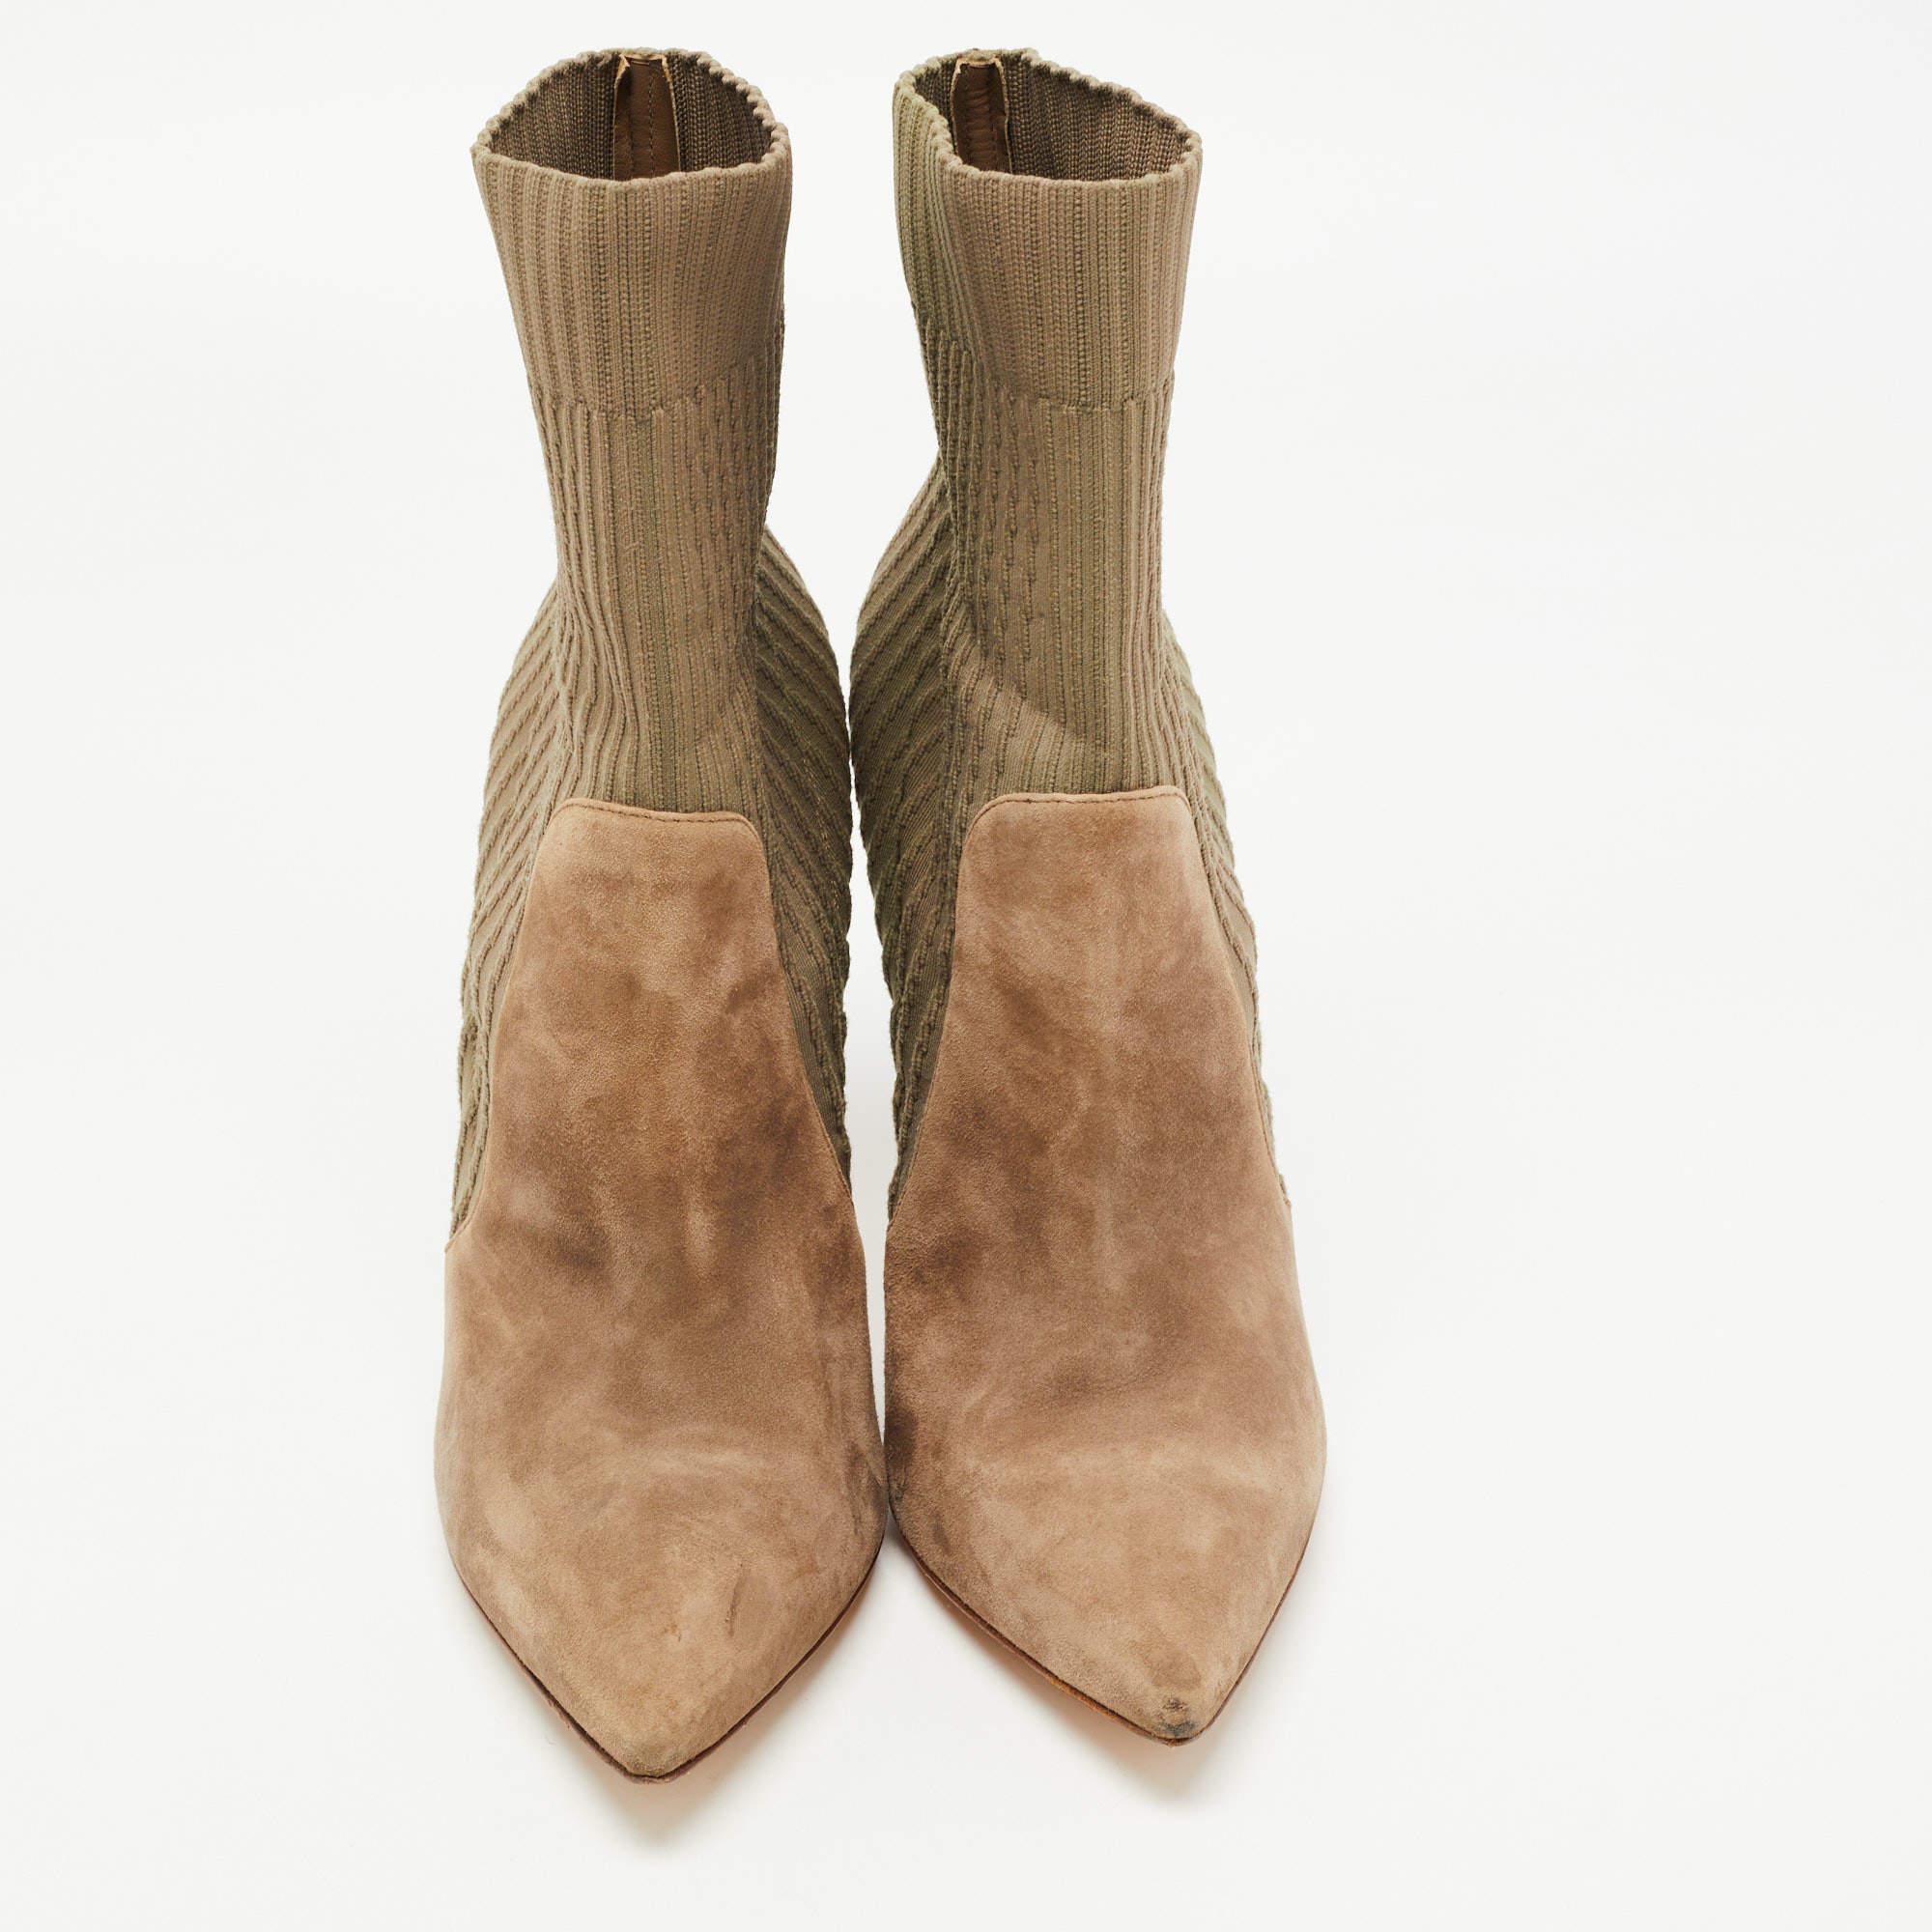 Boots are an essential part of your wardrobe, and these booties, crafted from top-quality materials, are a fine choice. Offering the best of comfort and style, this sturdy-soled pair would be great with a dress for a casual day out!

